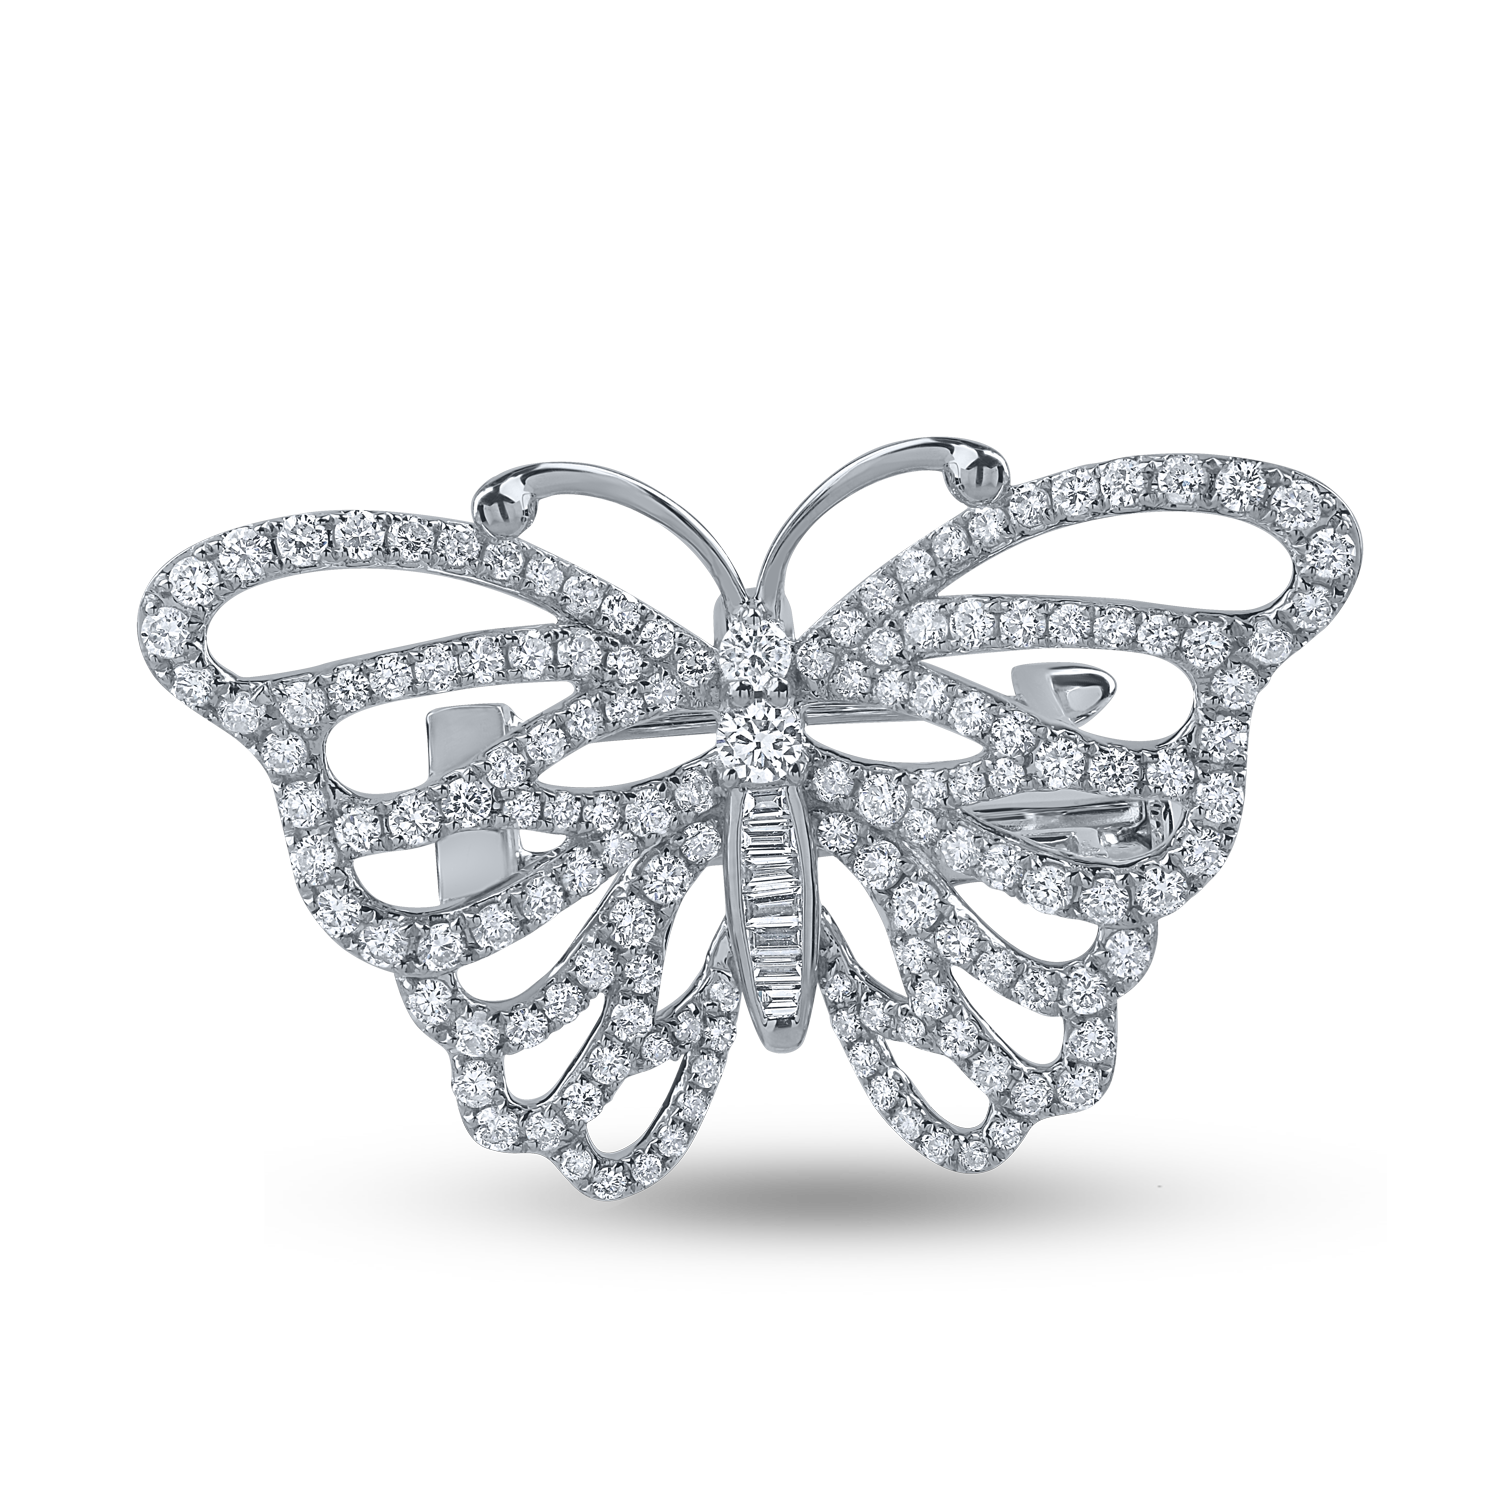 White gold and silver tiara with 2.83ct diamonds